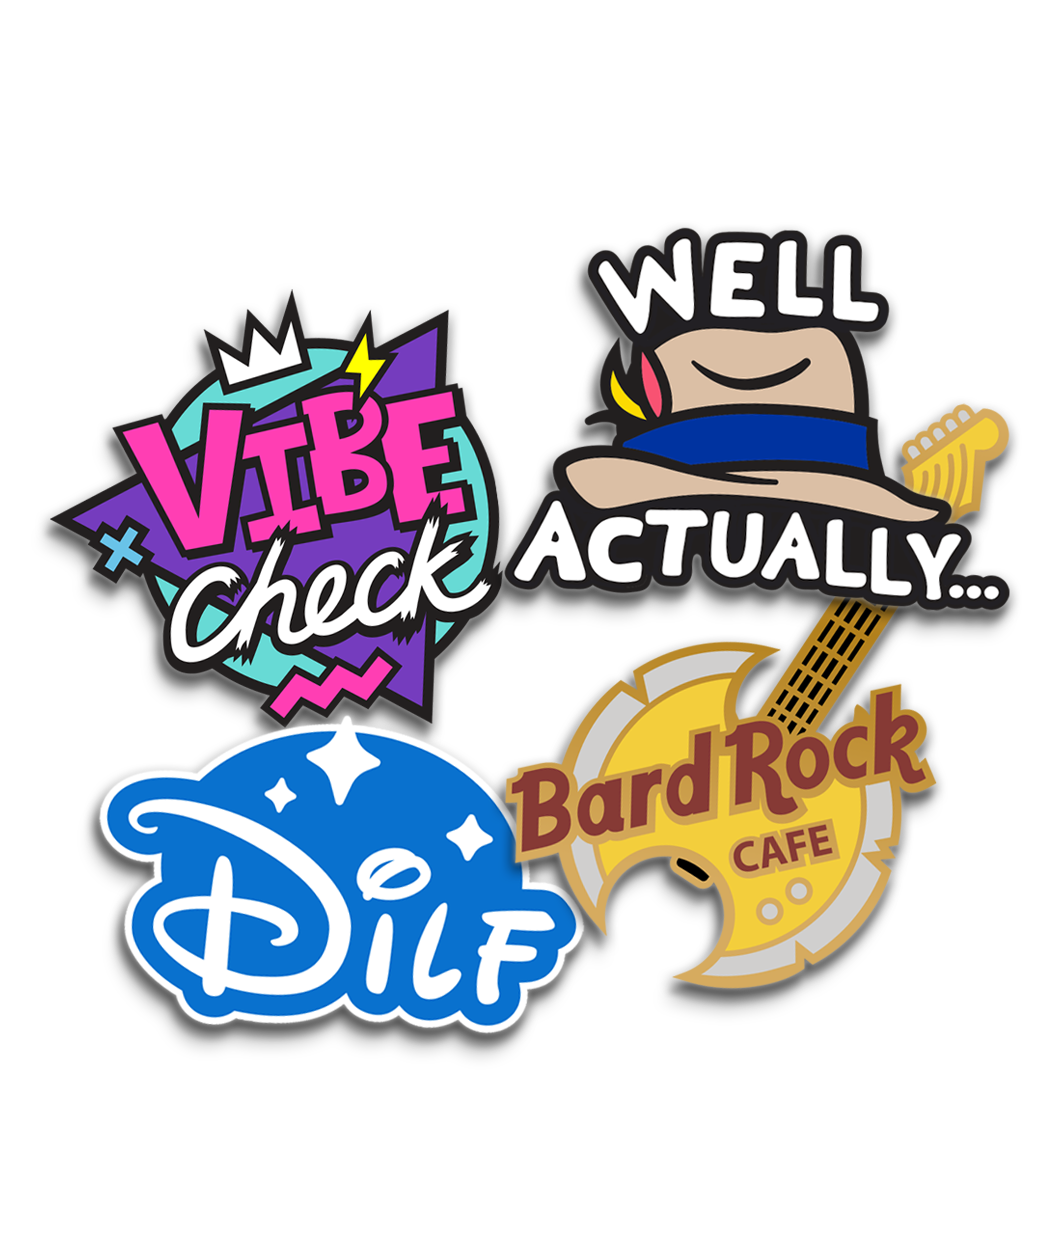 90s themed sticker that says "Vibe Check", a khaki colored fedora with blue ribbon and feathers that says, "Well Actually..." in white around it. A sticker that looks like the Disney logo, but it says DILF. A sticker of an electric guitar with a yellow axe head for the body and says Bard Rock Cafe in burgundy on it.